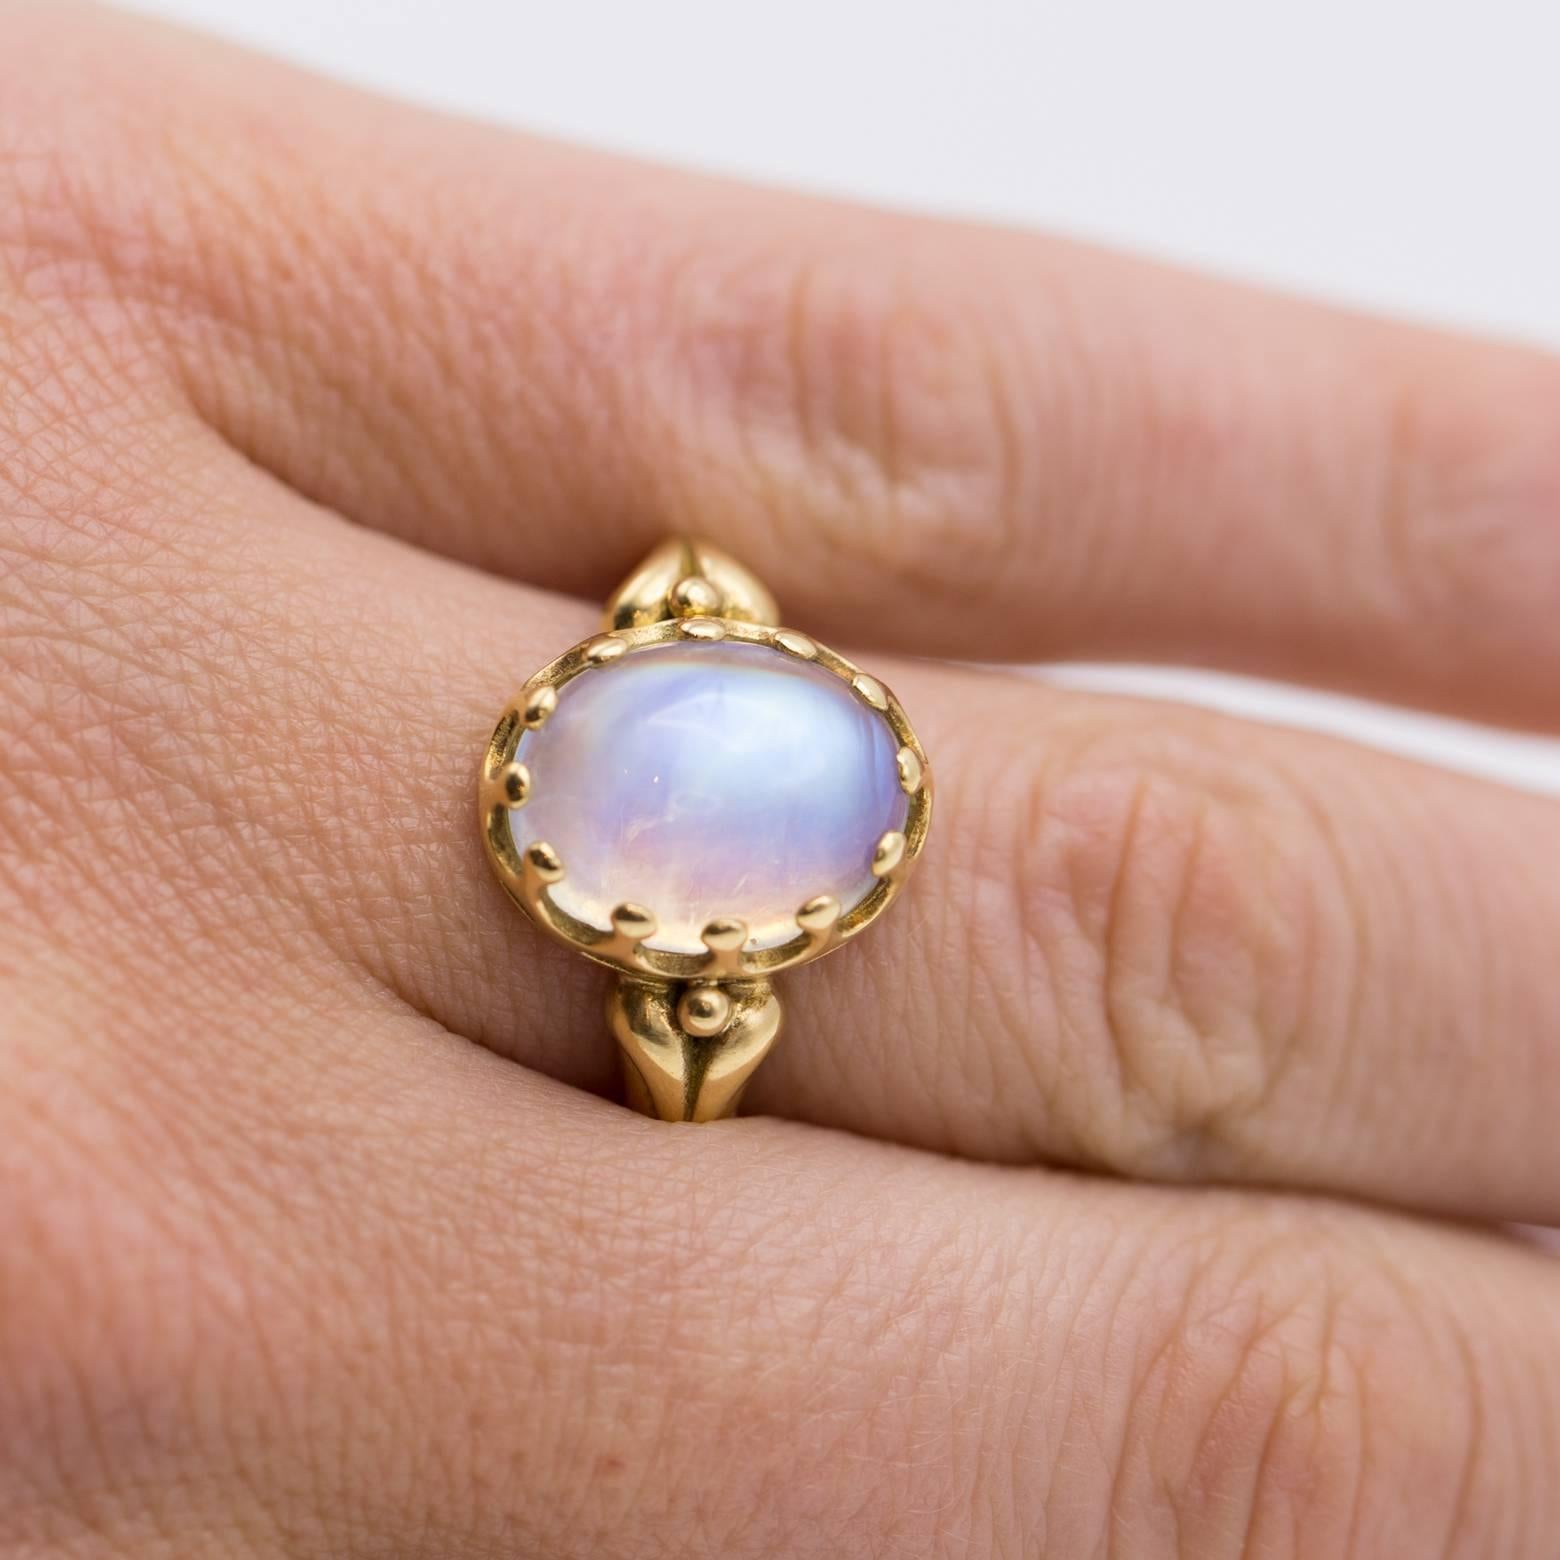 This artistic and gorgeous ring has an incredible bezel and gorgeous band. The oval moonstone has beautiful horizontal inclusions that create bright rainbow colors that are mesmerizing. Set in 18K yellow gold this ring sings with beauty. 